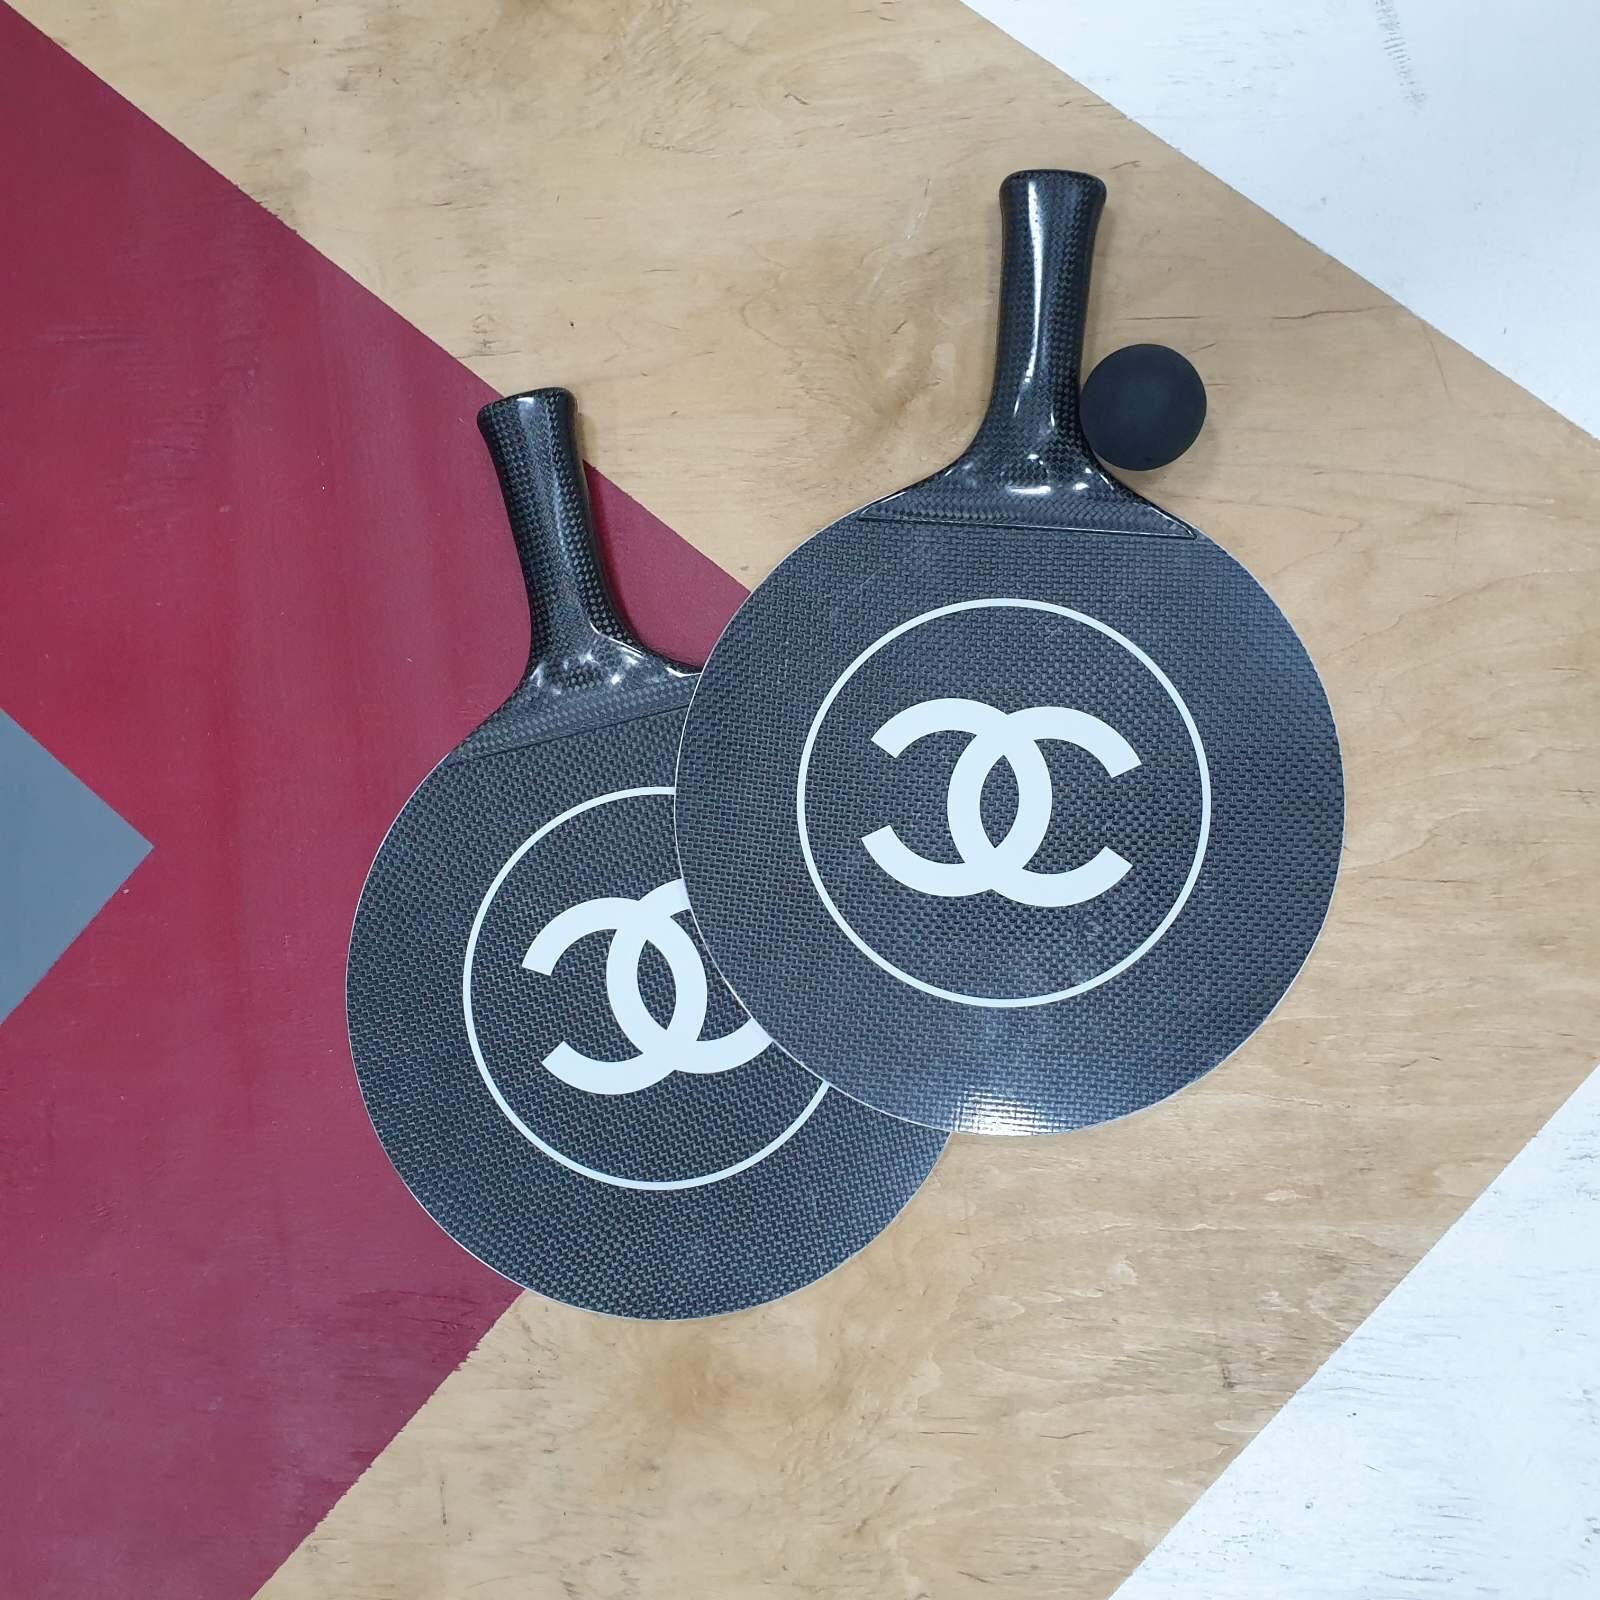 CHANEL Tennis Ping Pong Carbon Fiber Paddles Racket set with rubber ball.

CHANEL Ping Pong/Paddle ball set.

These are such a staple for the luxury connoisseur and an amazing conversation starter!
Stunning CC Iconic Logo.
These rackets are